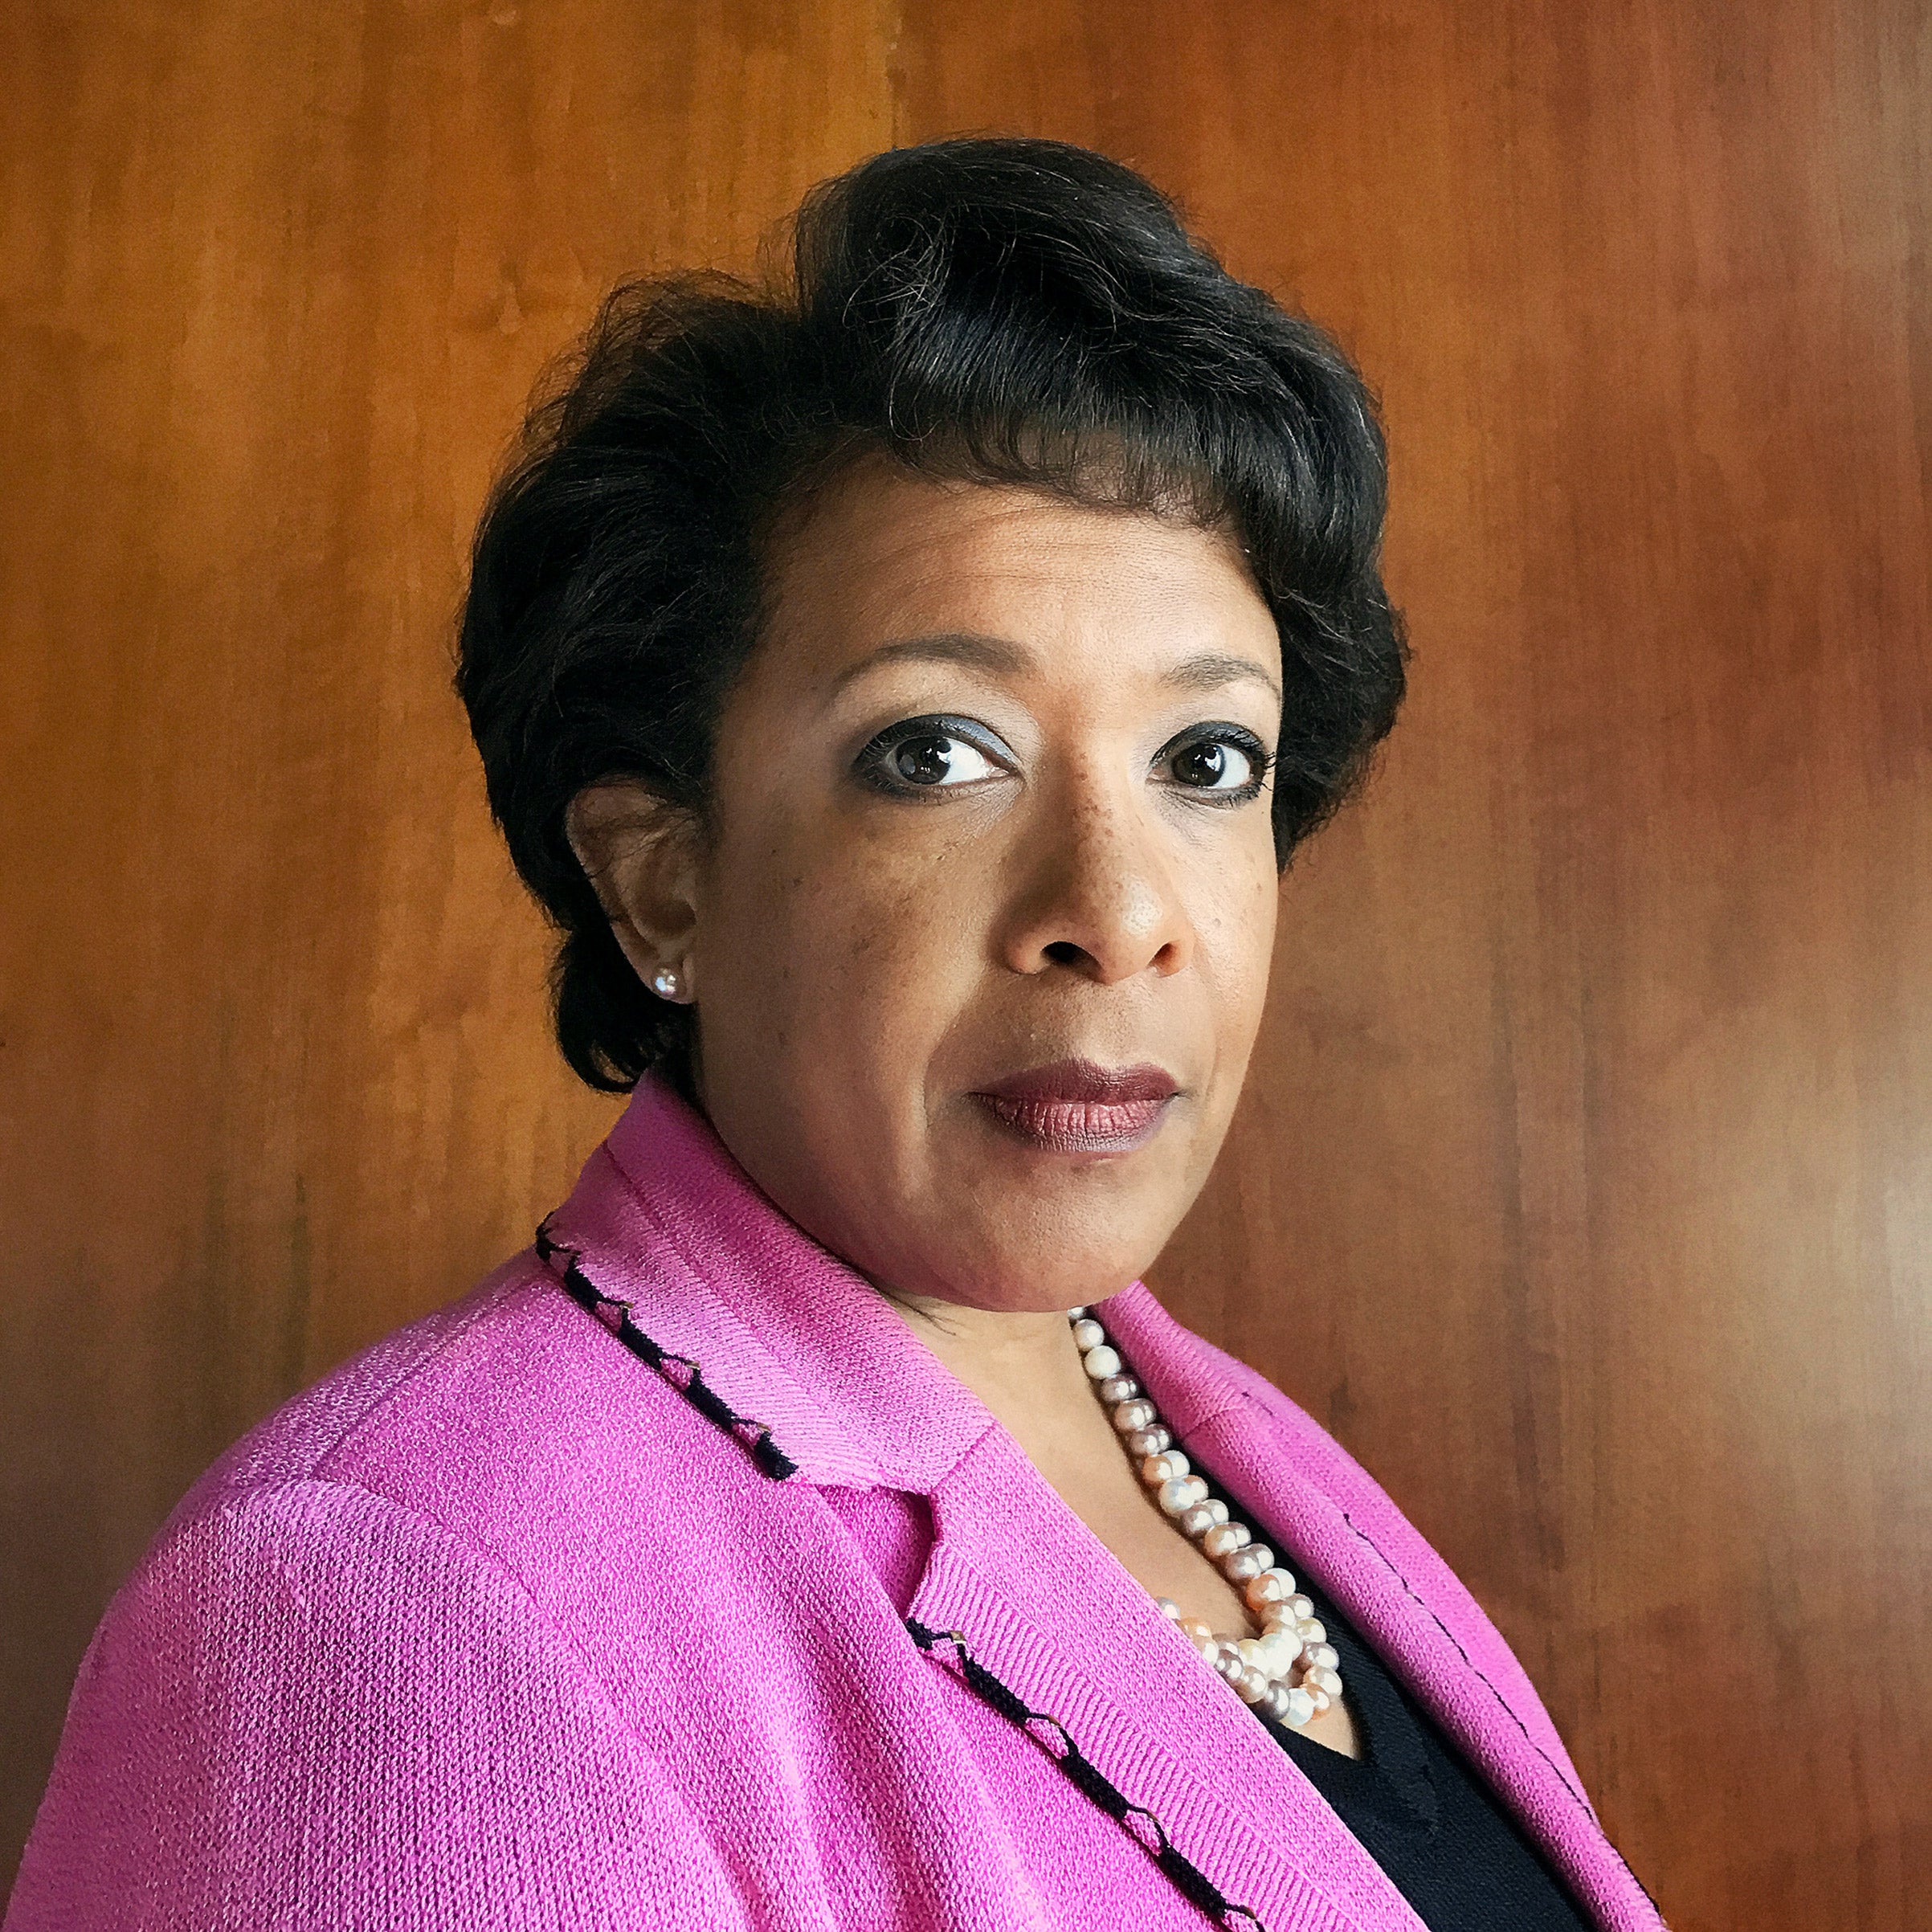 How Injustice And Racism Of The Segregated South Led Loretta Lynch To Make History
